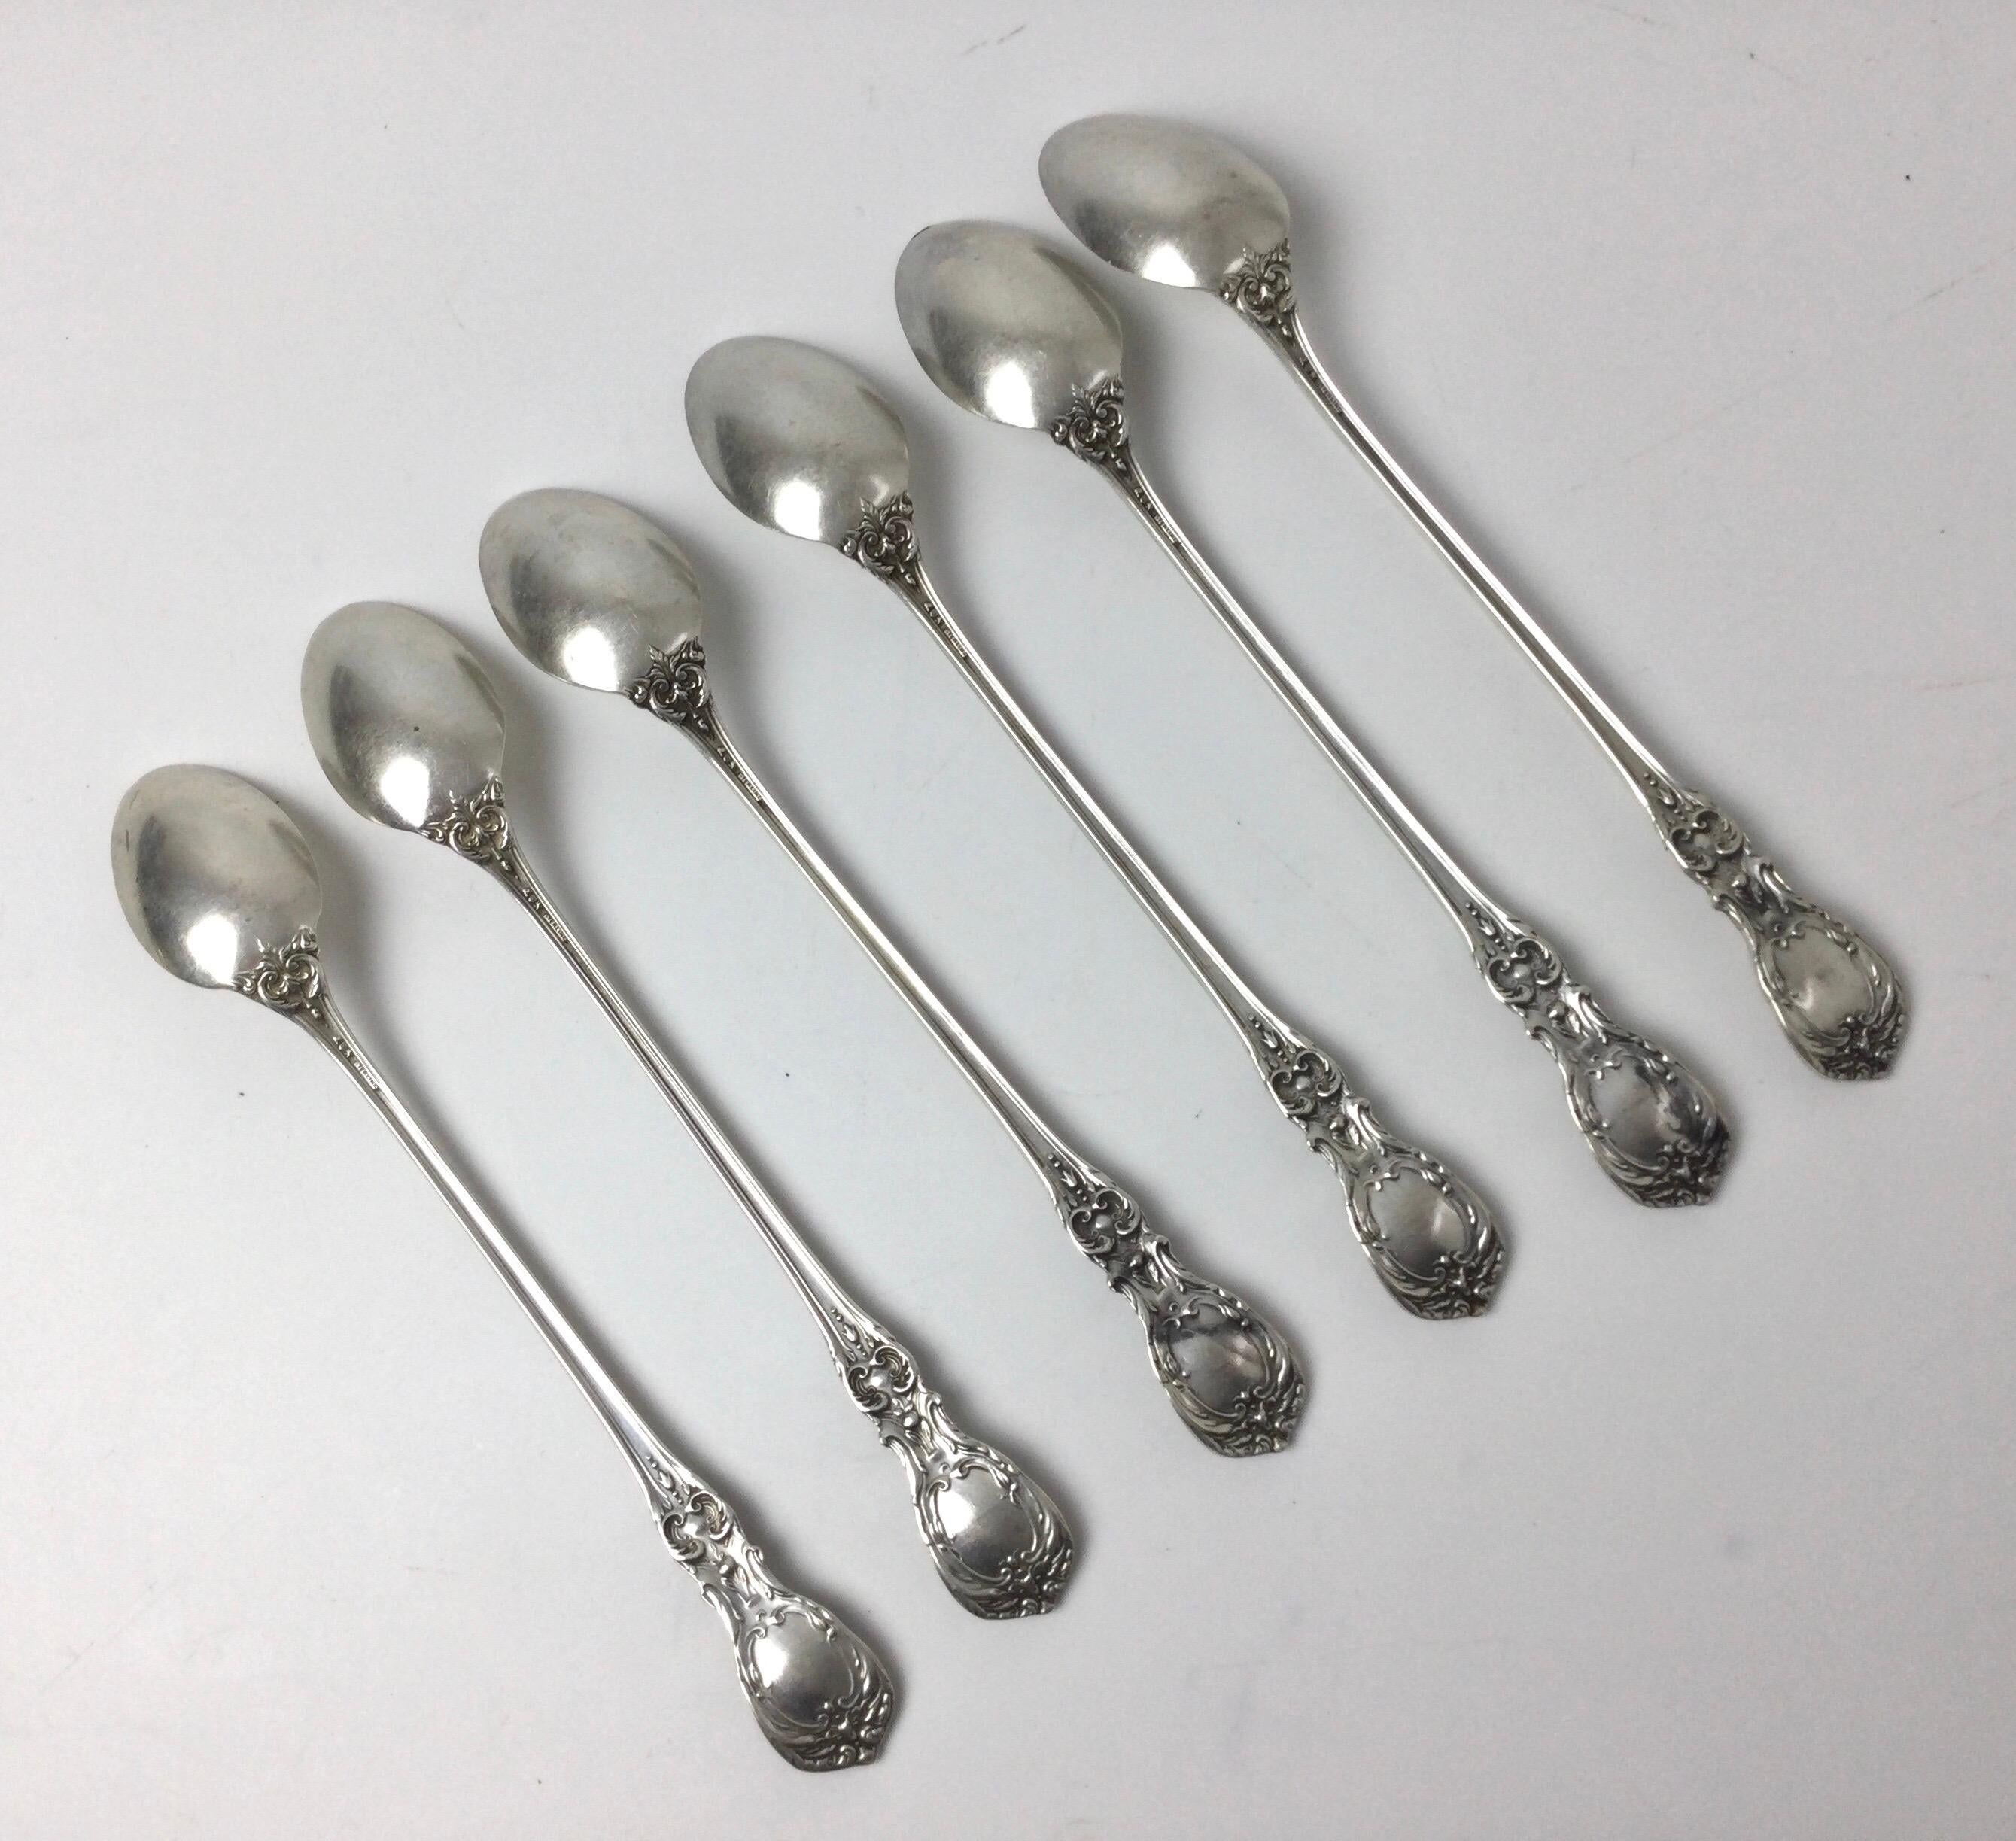 NEARLY NEW CONDITION REED & BARTON TAPESTRY STERLING SILVER ICED TEA SPOON 